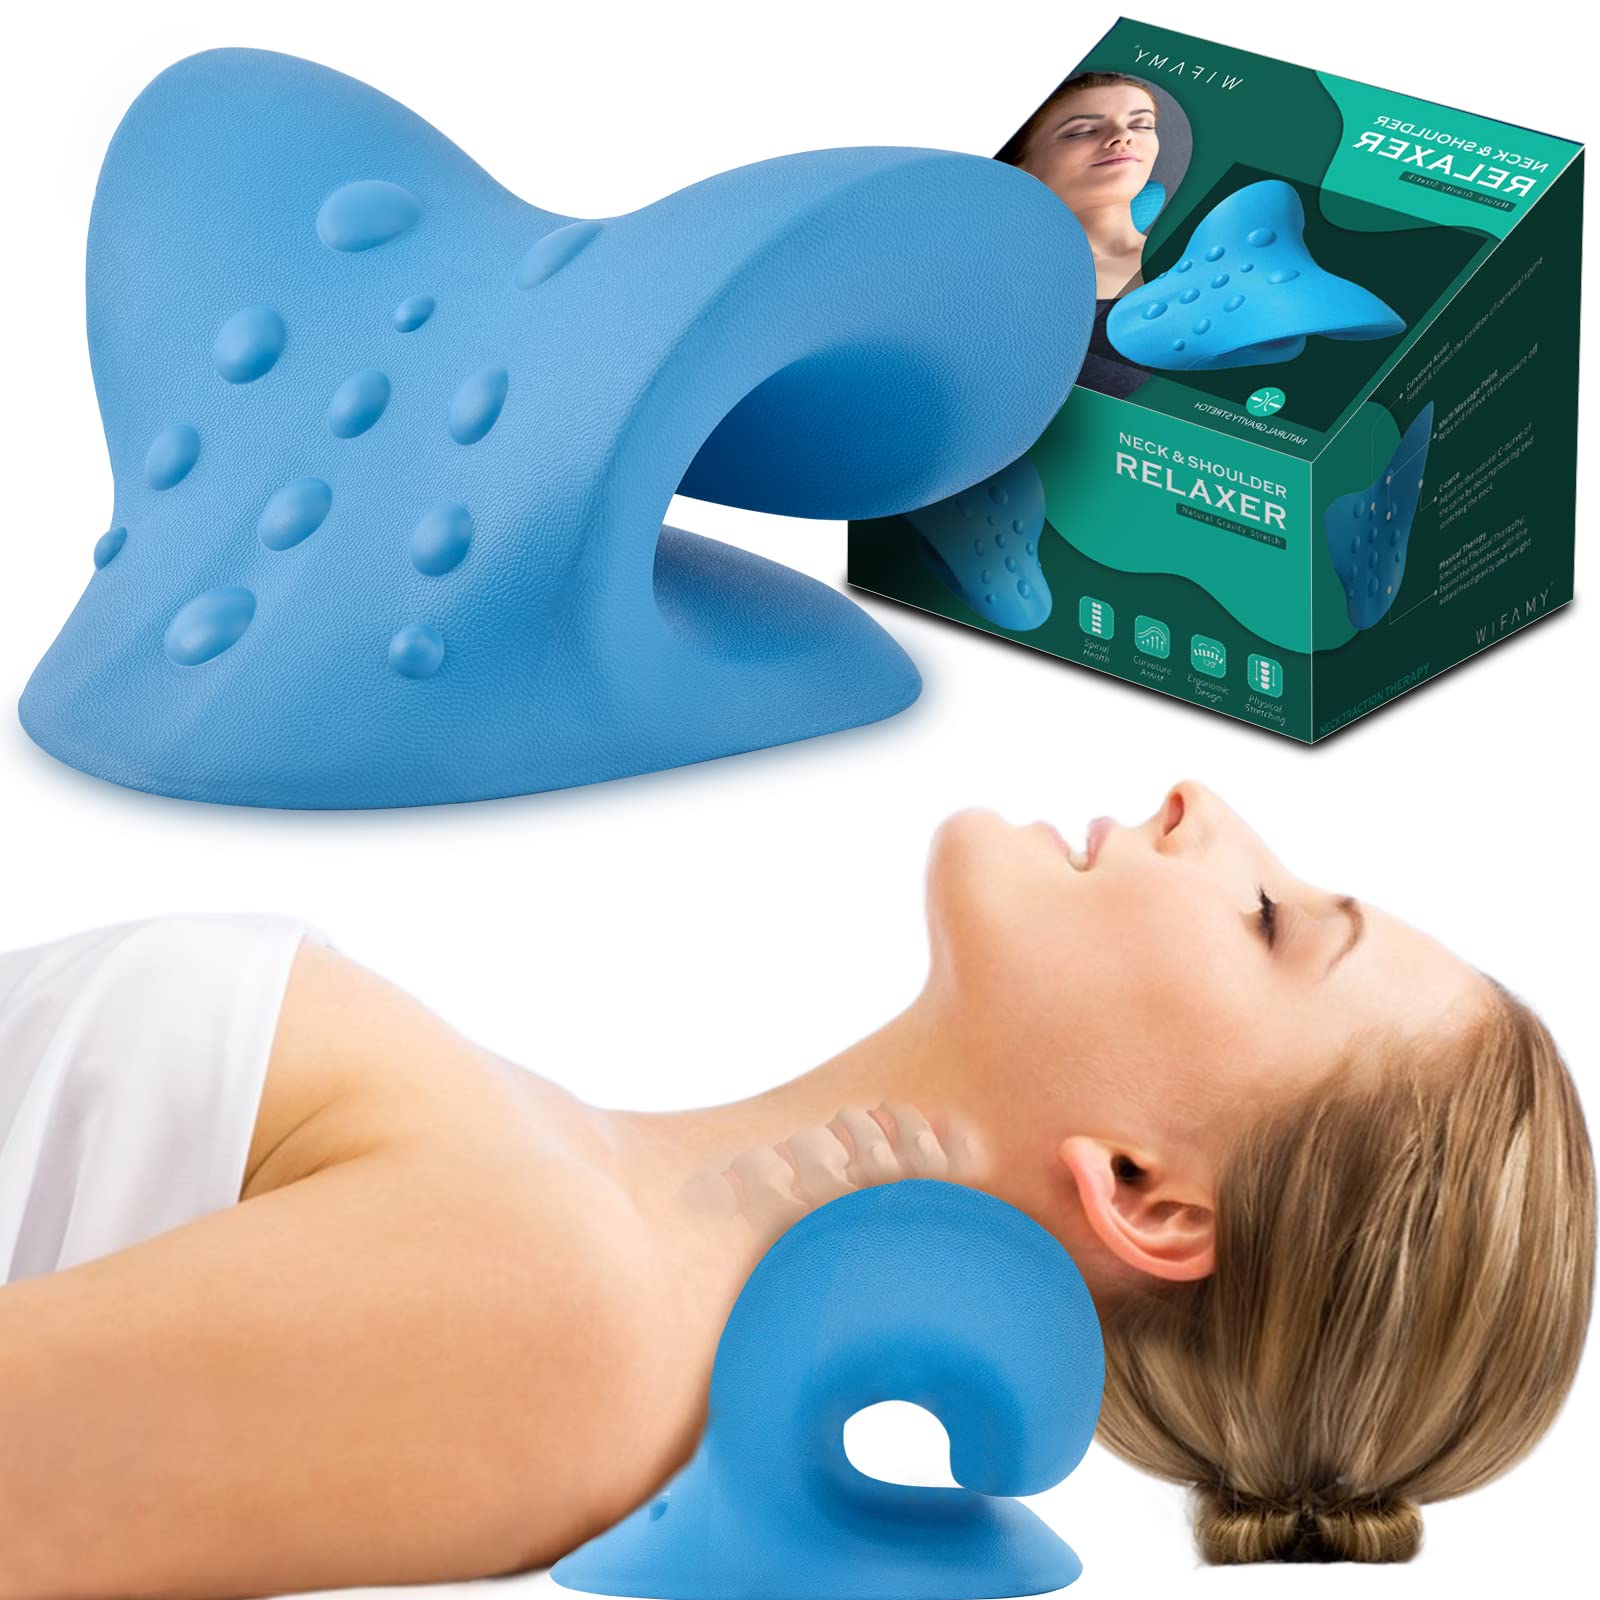 Bos medicare surgical Neck Relaxer | Cervical Pillow for Neck and Shoulder  Pain | Cervical Traction Device for Neck Pain Relief Product Kit | Medical